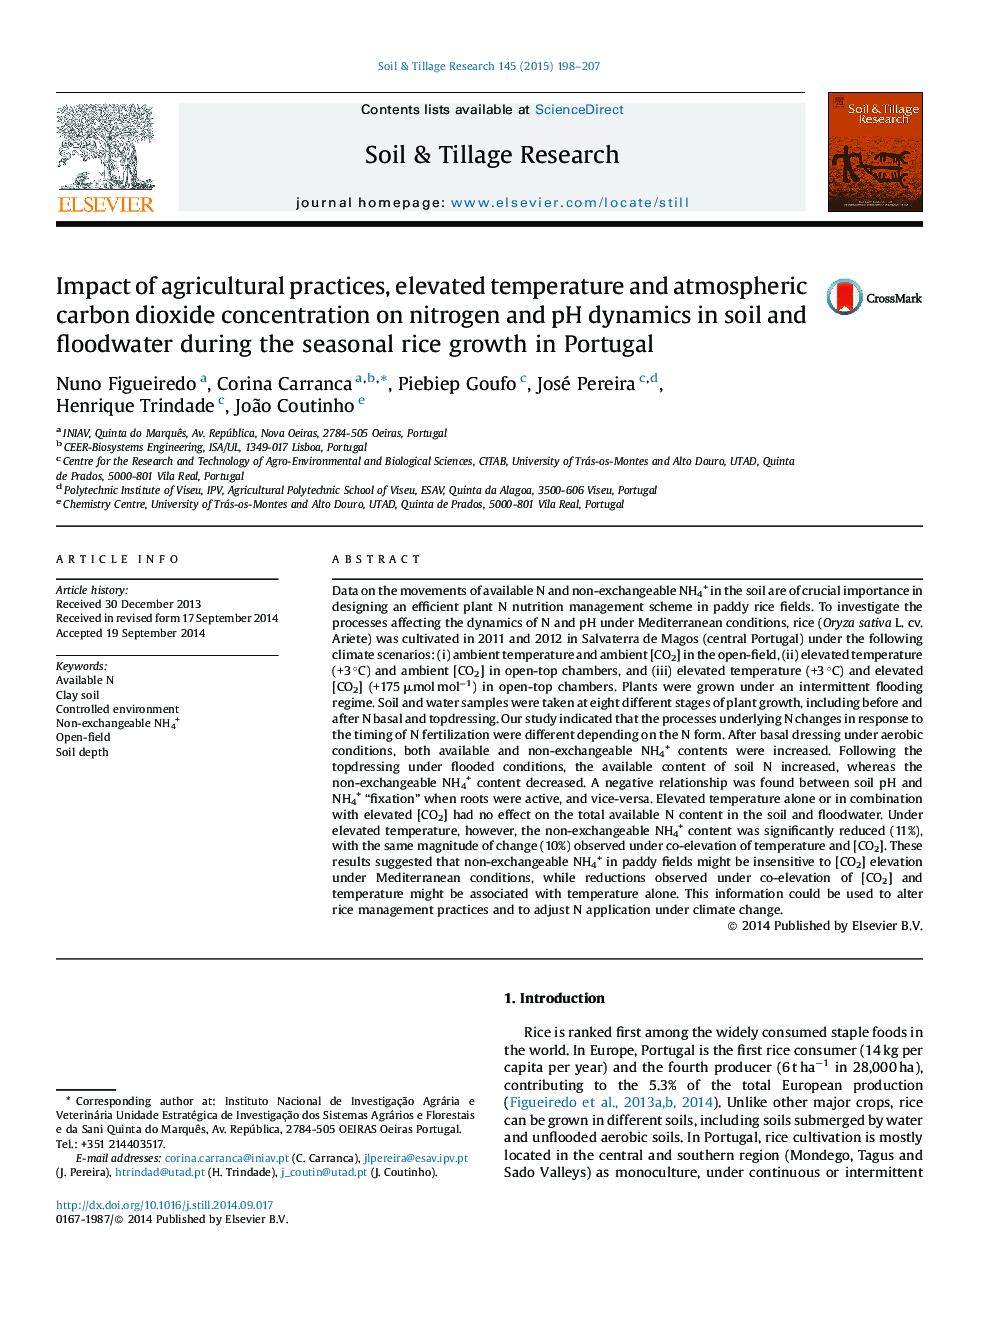 Impact of agricultural practices, elevated temperature and atmospheric carbon dioxide concentration on nitrogen and pH dynamics in soil and floodwater during the seasonal rice growth in Portugal